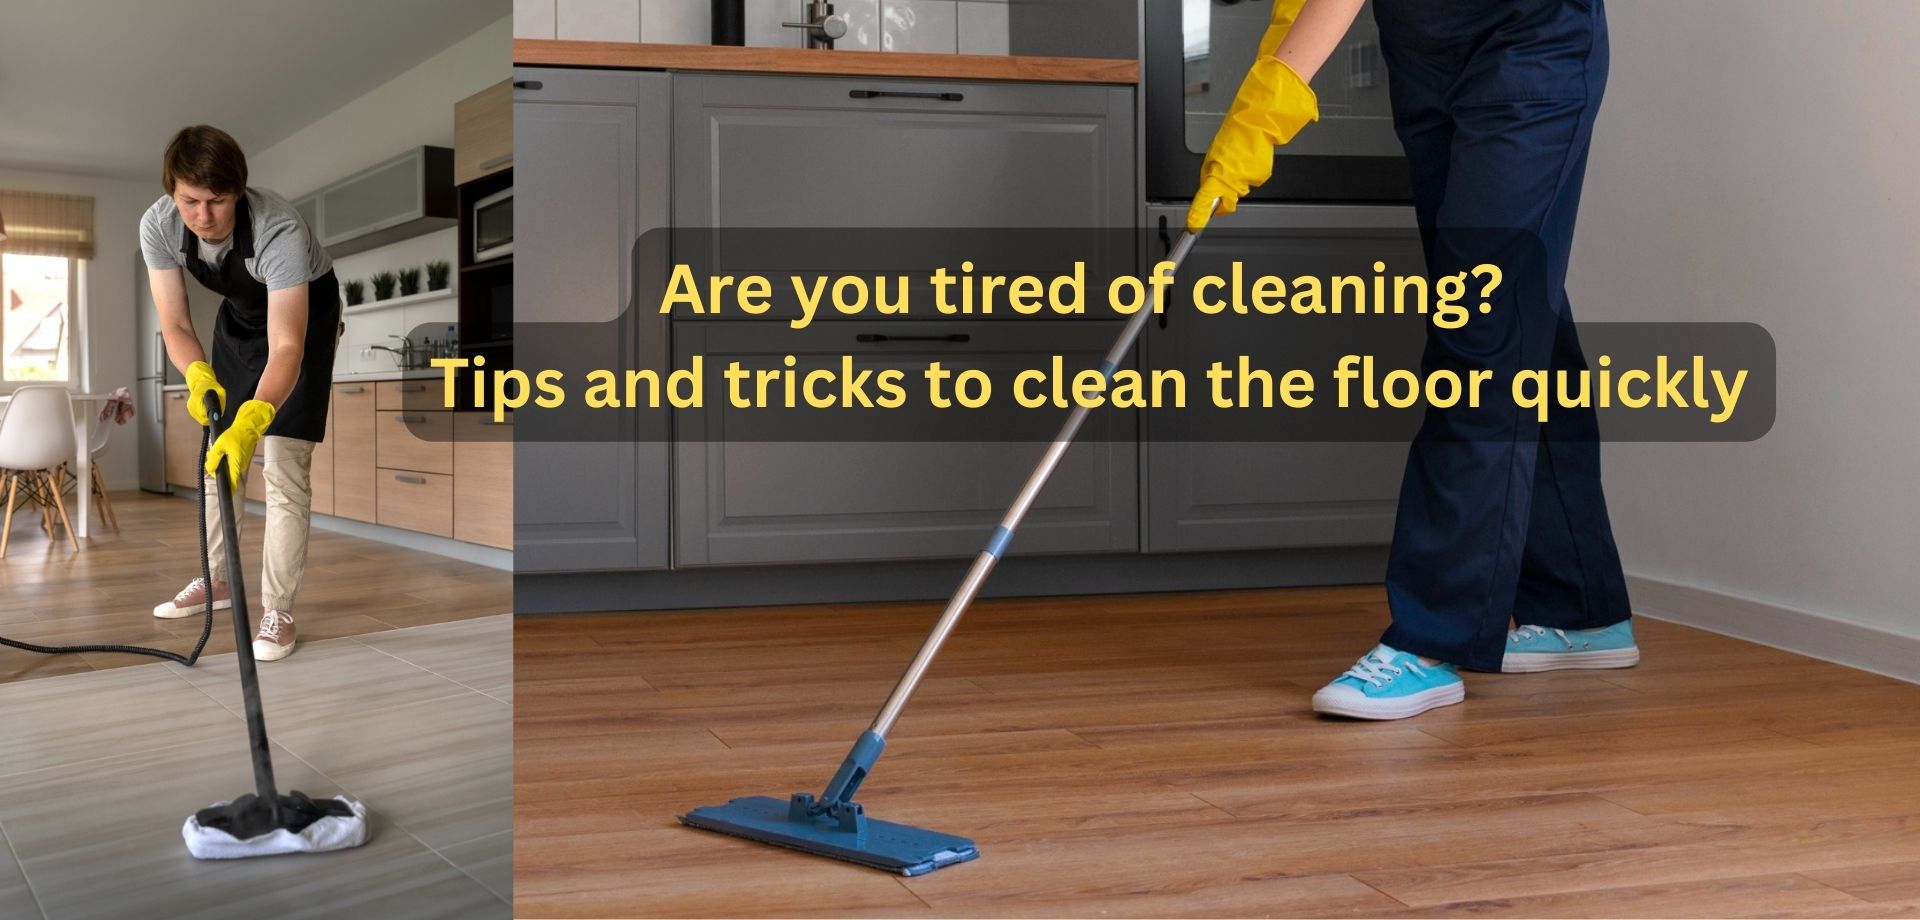 Are you tired of cleaning? Tips and tricks to clean the floor quickly